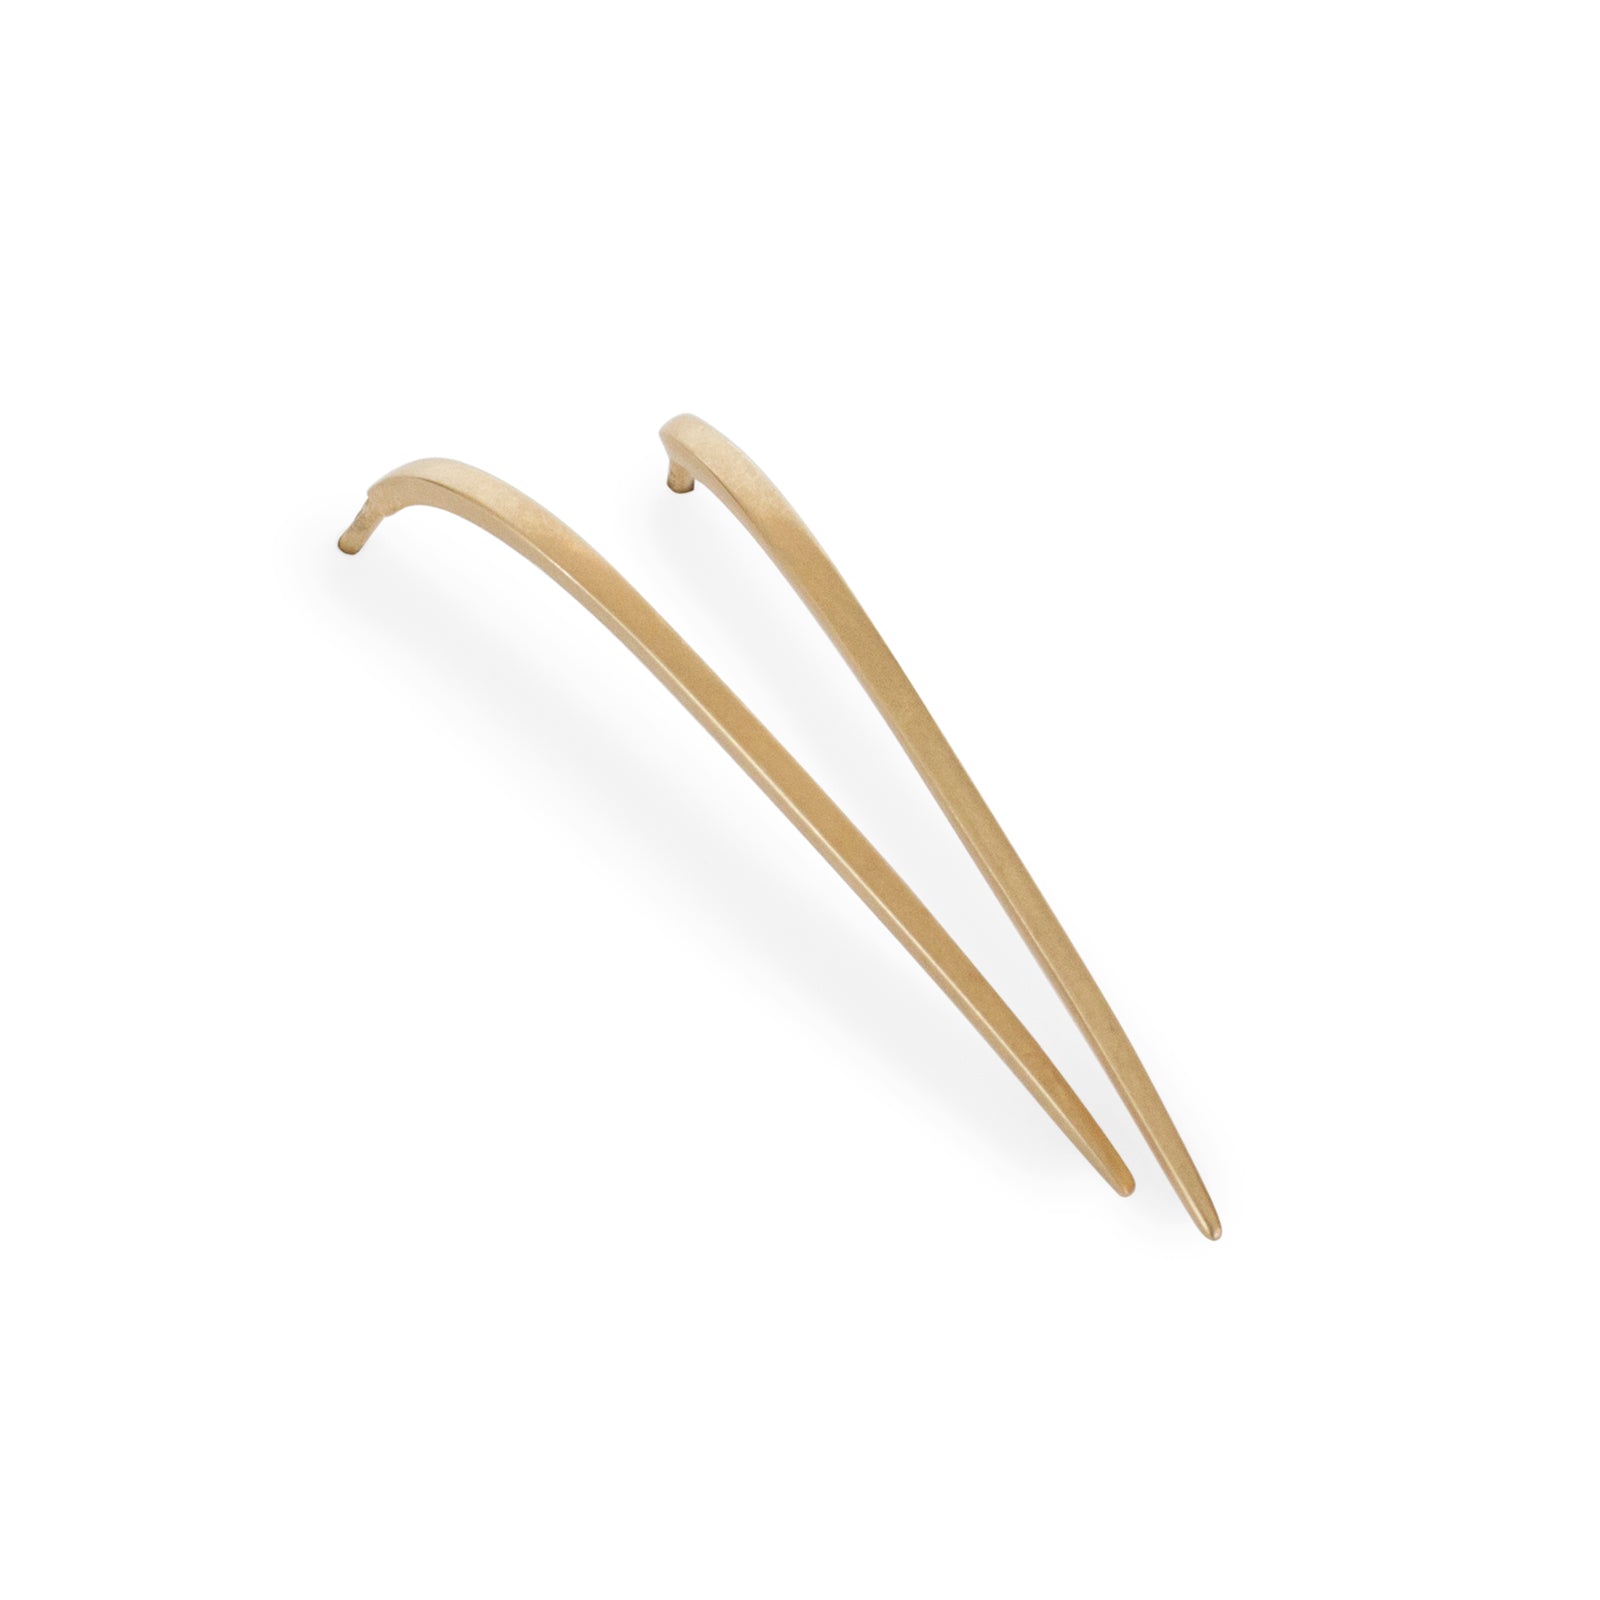 14k yellow gold curved stake studs